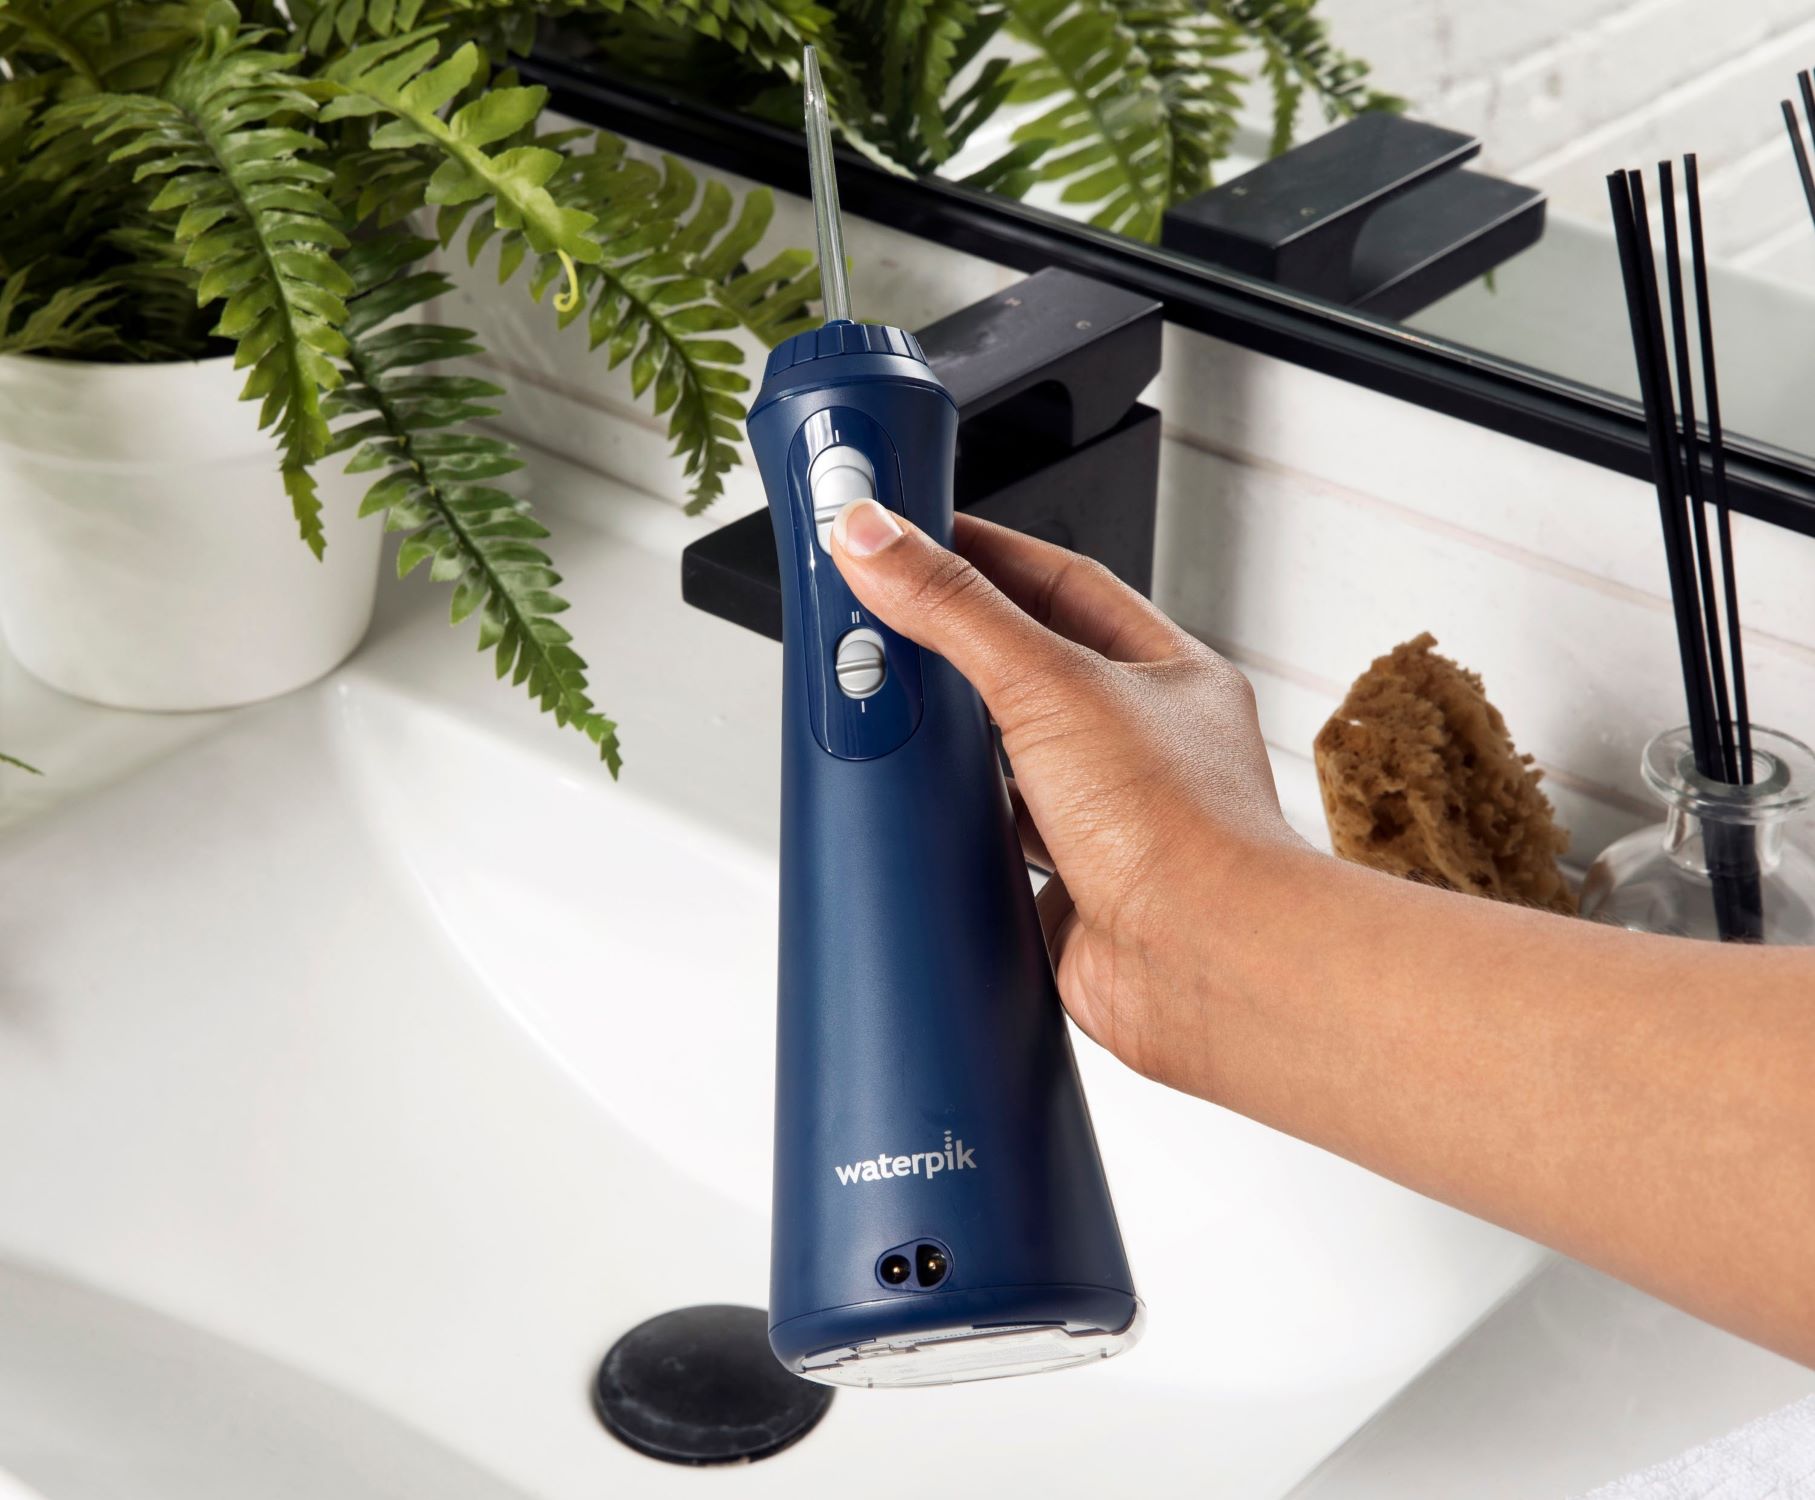 How To Use The Waterpik Water Flosser